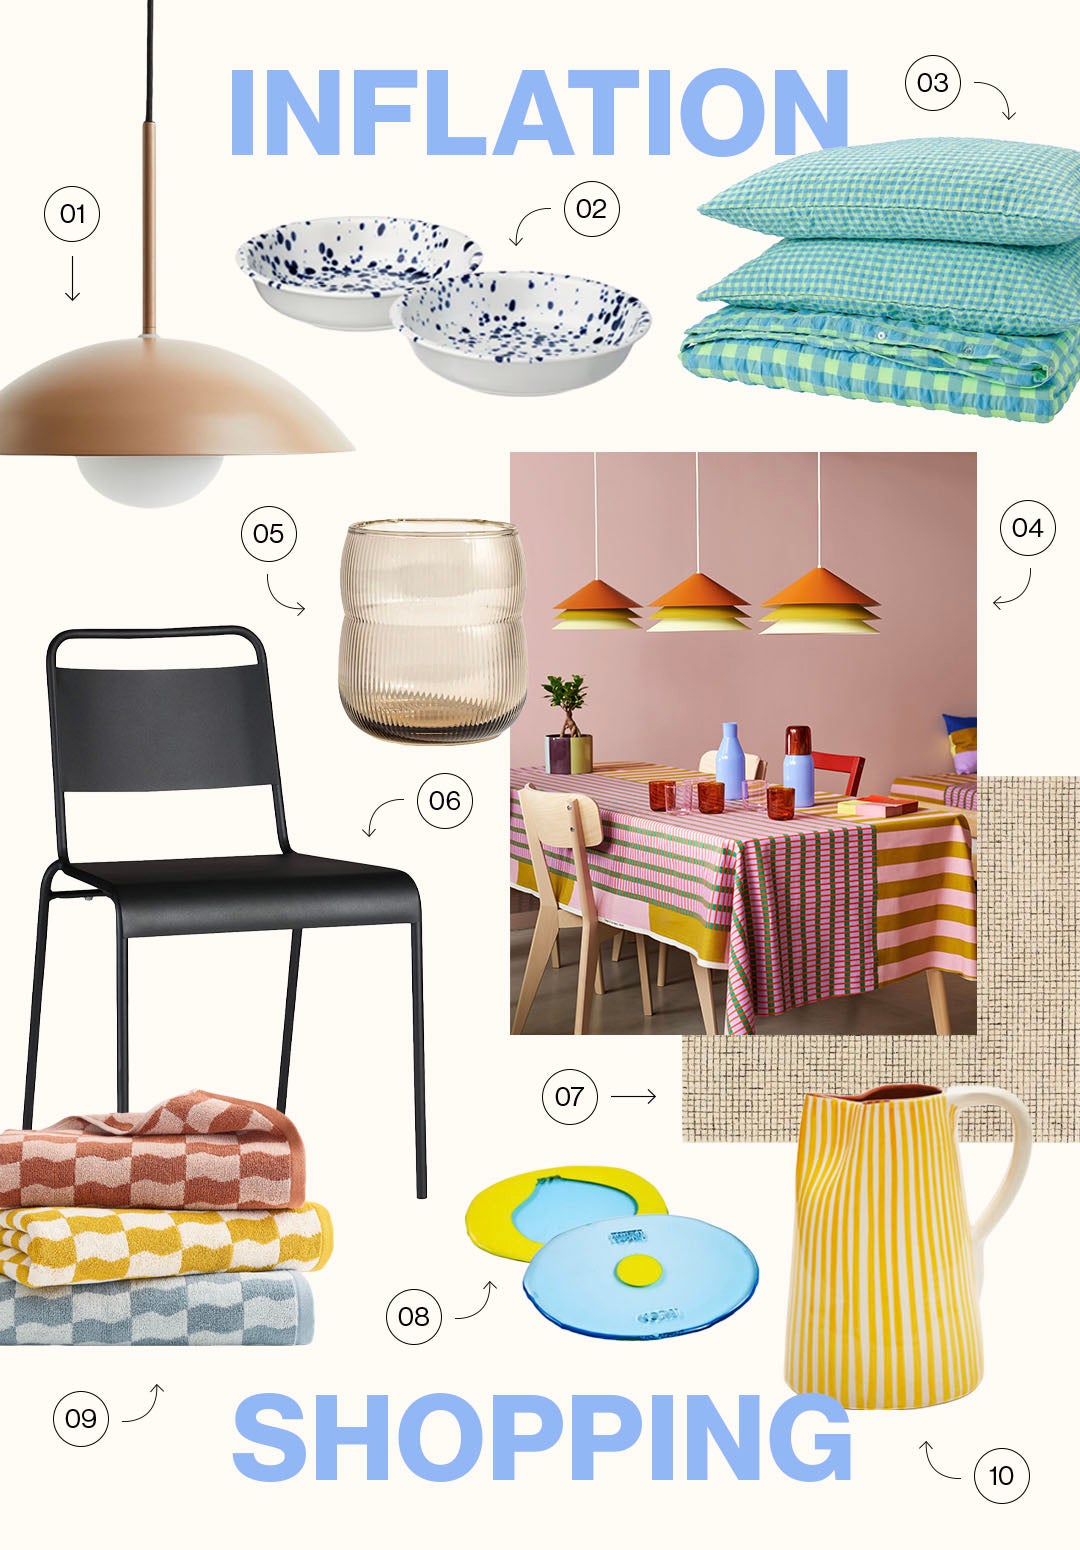 moodboard of colorful, inexpensive decor